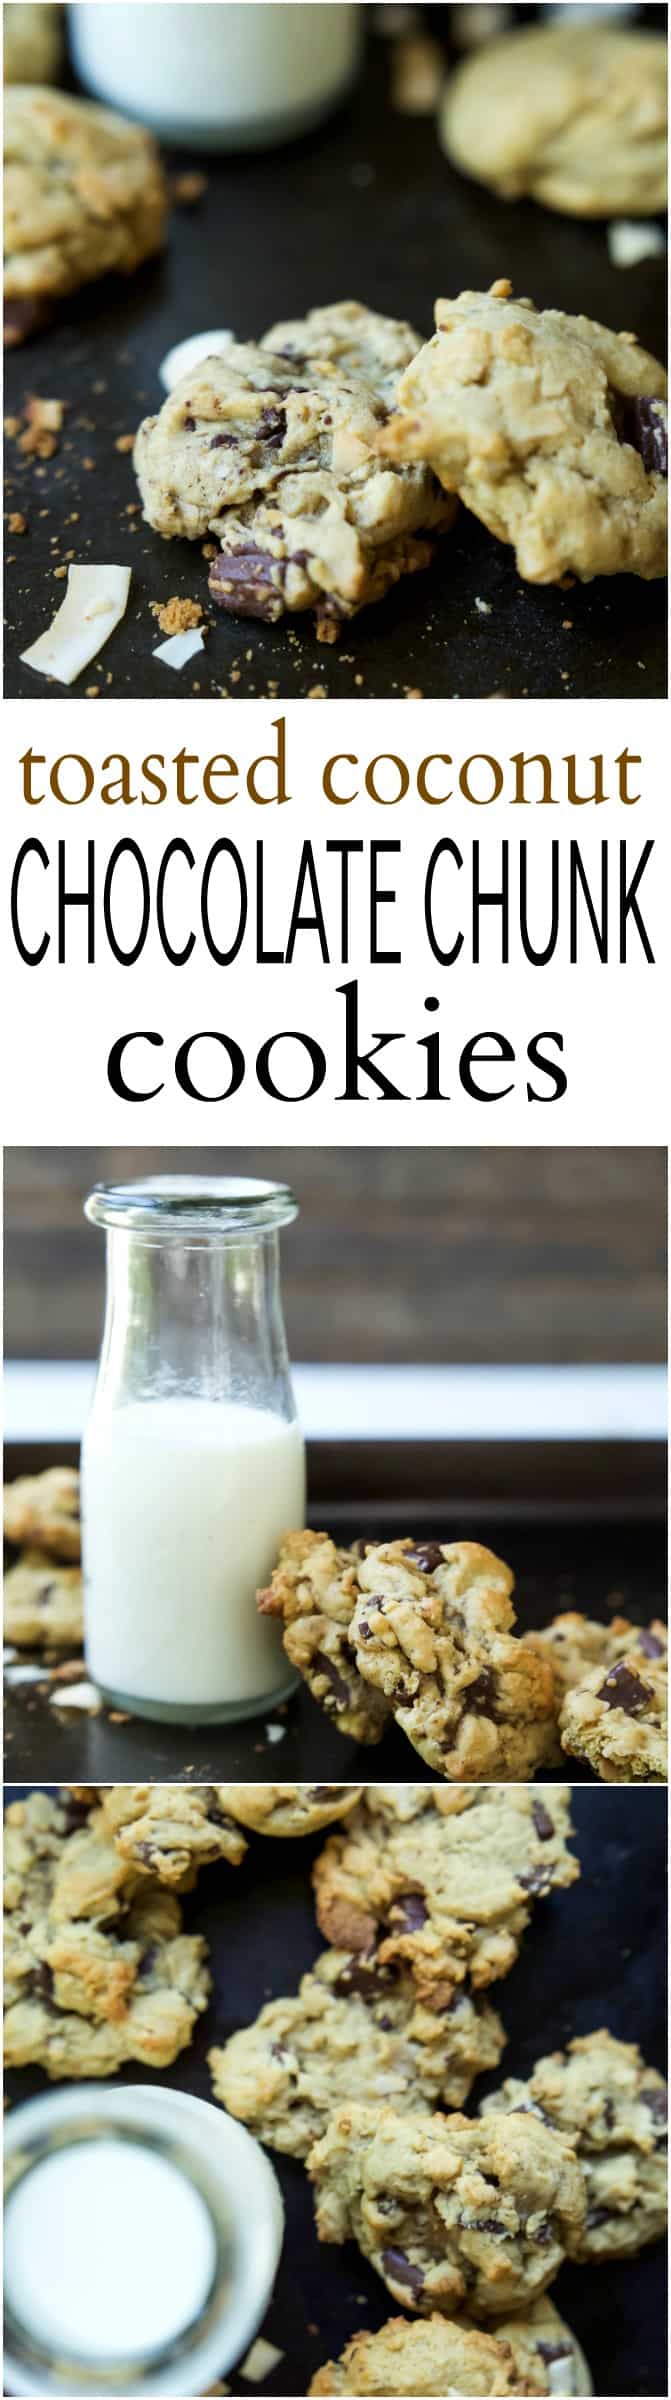 Toasted Coconut Chocolate Chunk Cookies that are soft, chewy, oozing with chocolate goodness all while using LESS butter and sugar! I guarantee you'll want to hoard these cookies! | joyfulhealthyeats.com 